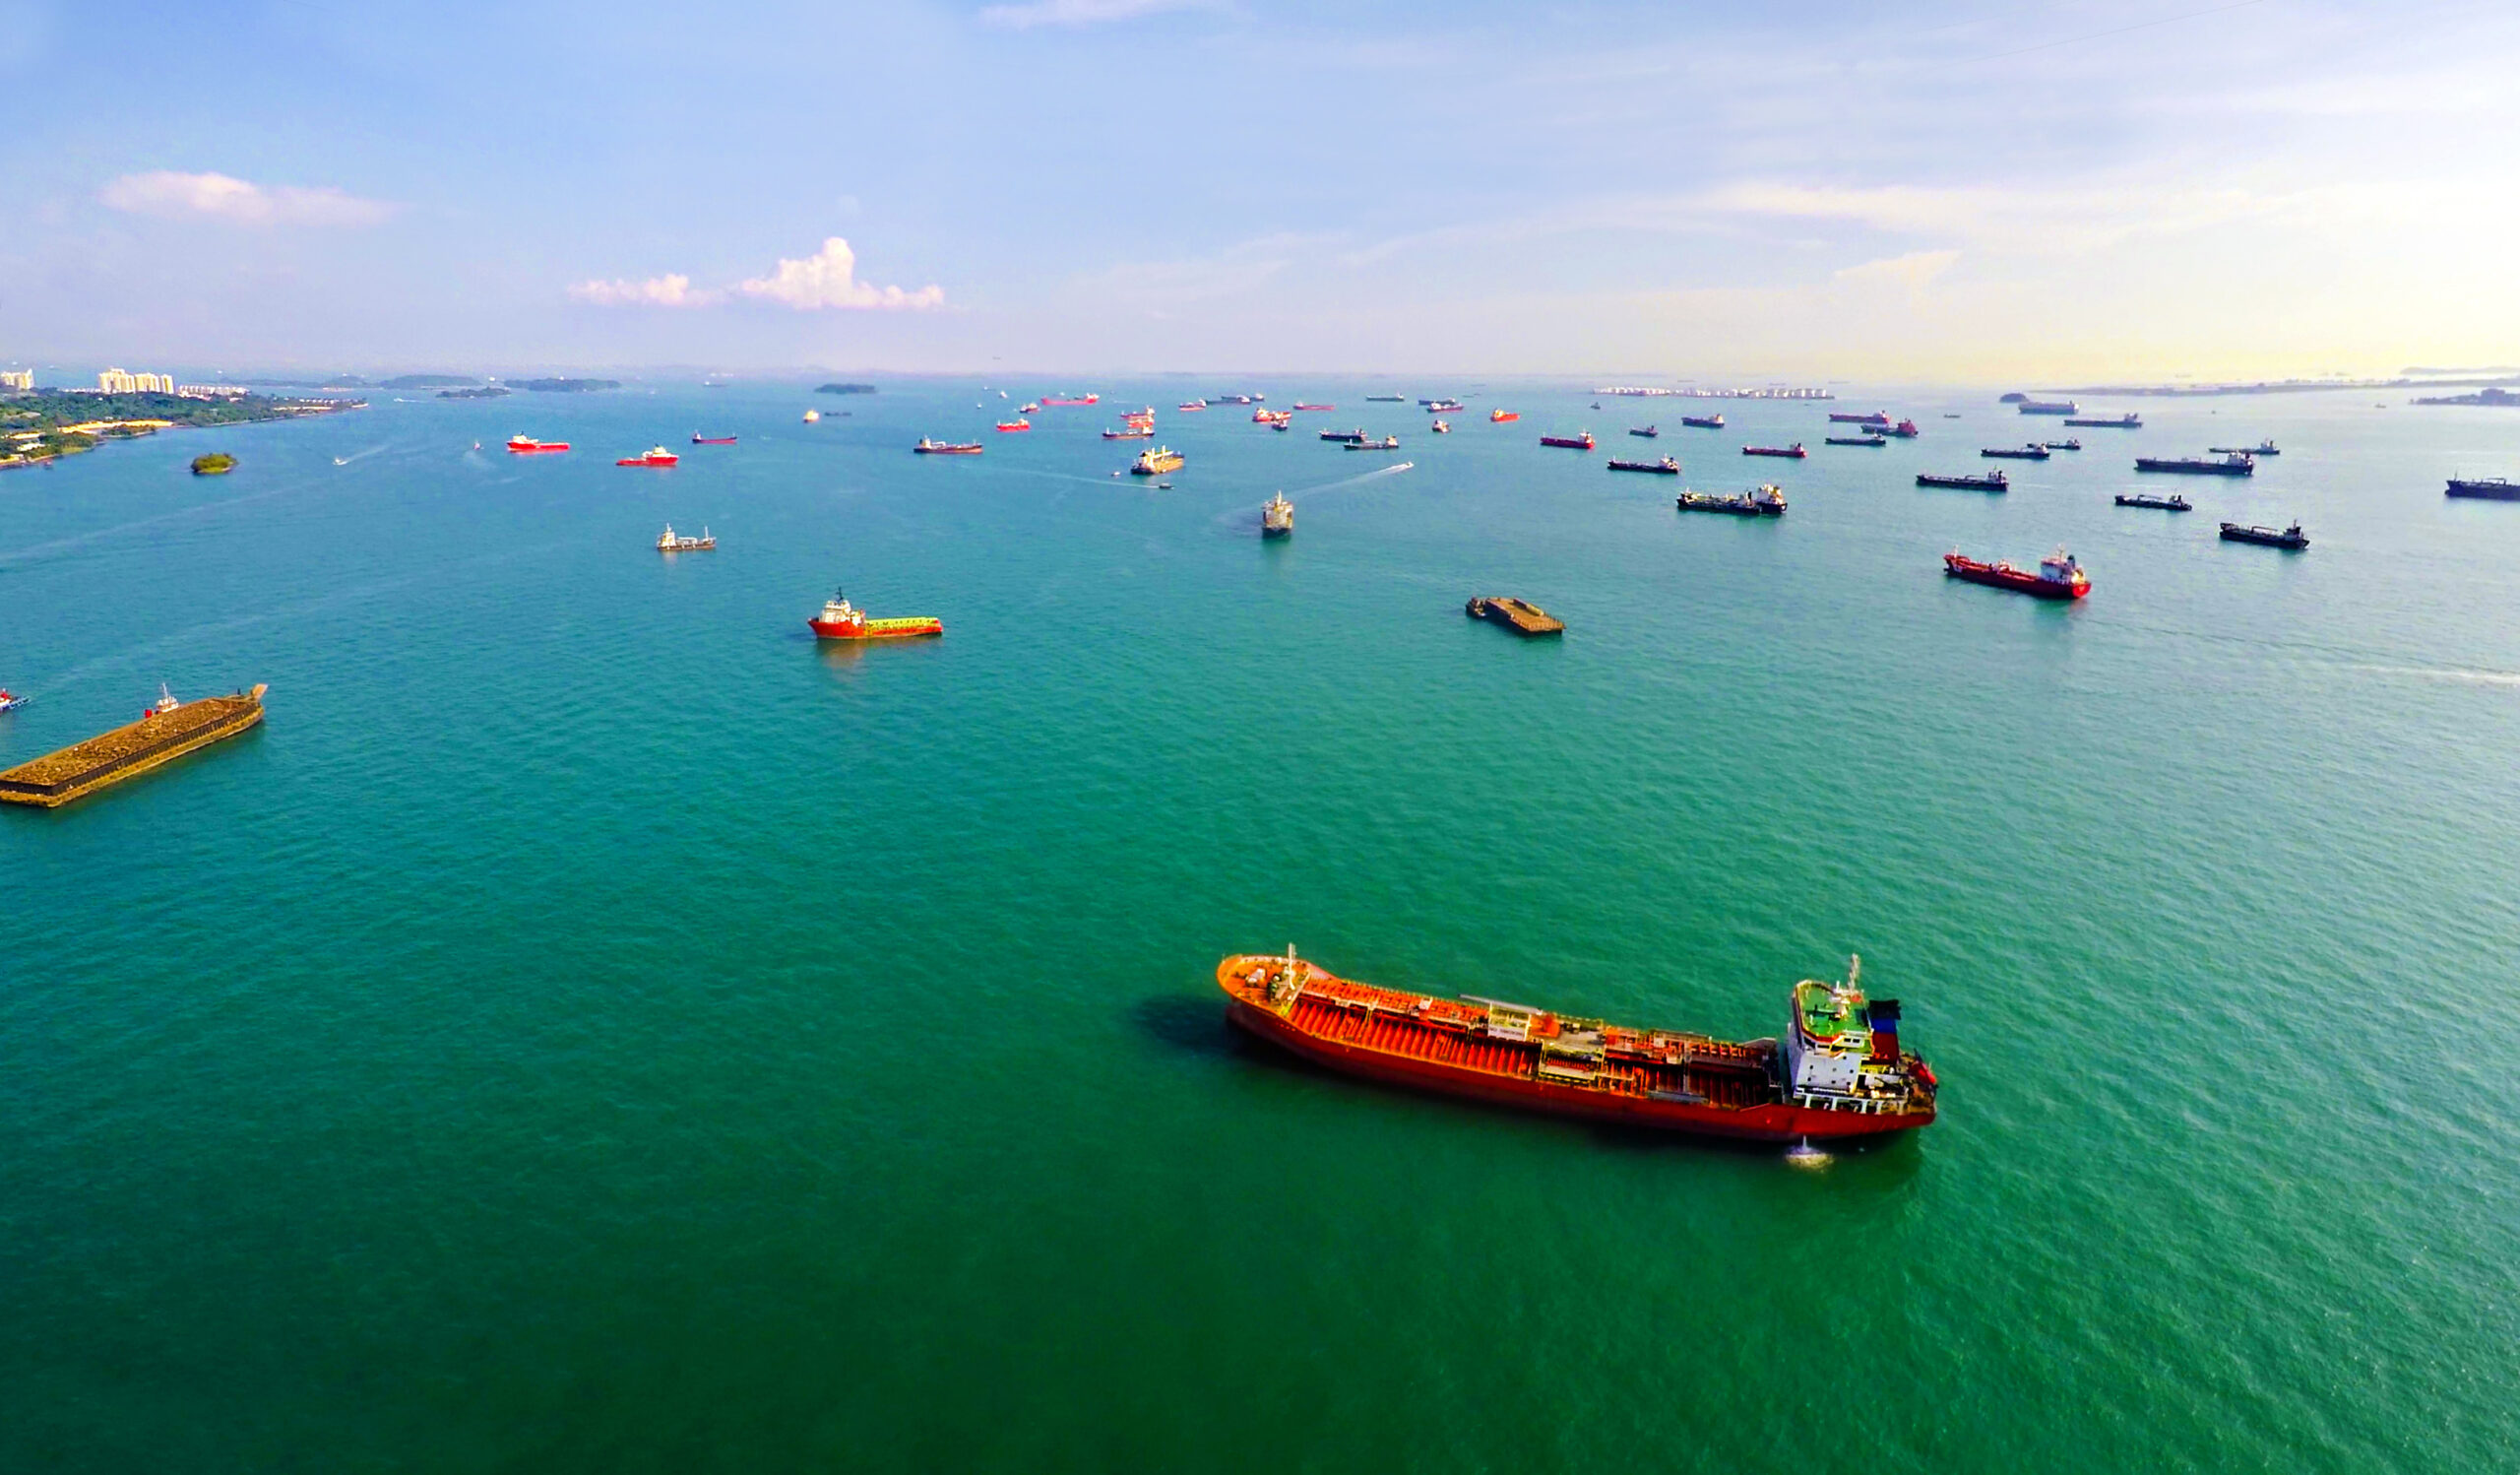 Singapore Ship traffic - anchorage on approach - vessels awaiting their turn to dock in port